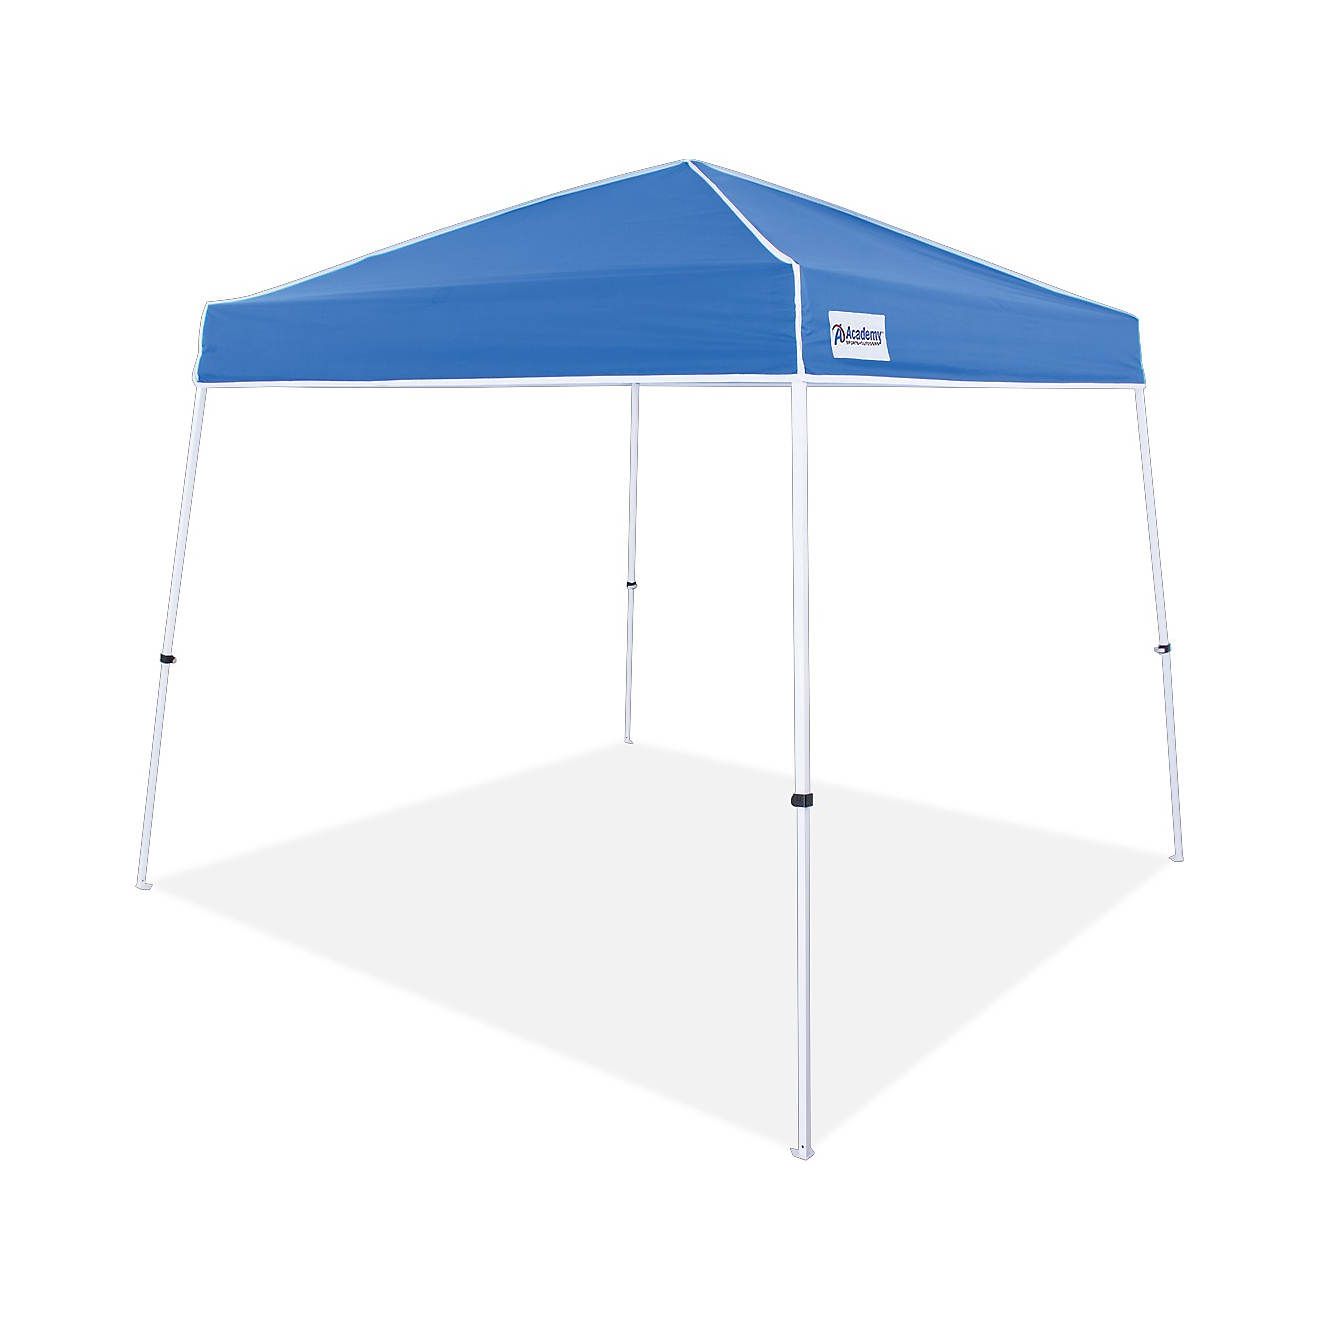 Academy Sports + Outdoors Easy Shade 10 ft x 10 ft Slant Leg Canopy | Academy Sports + Outdoor Affiliate